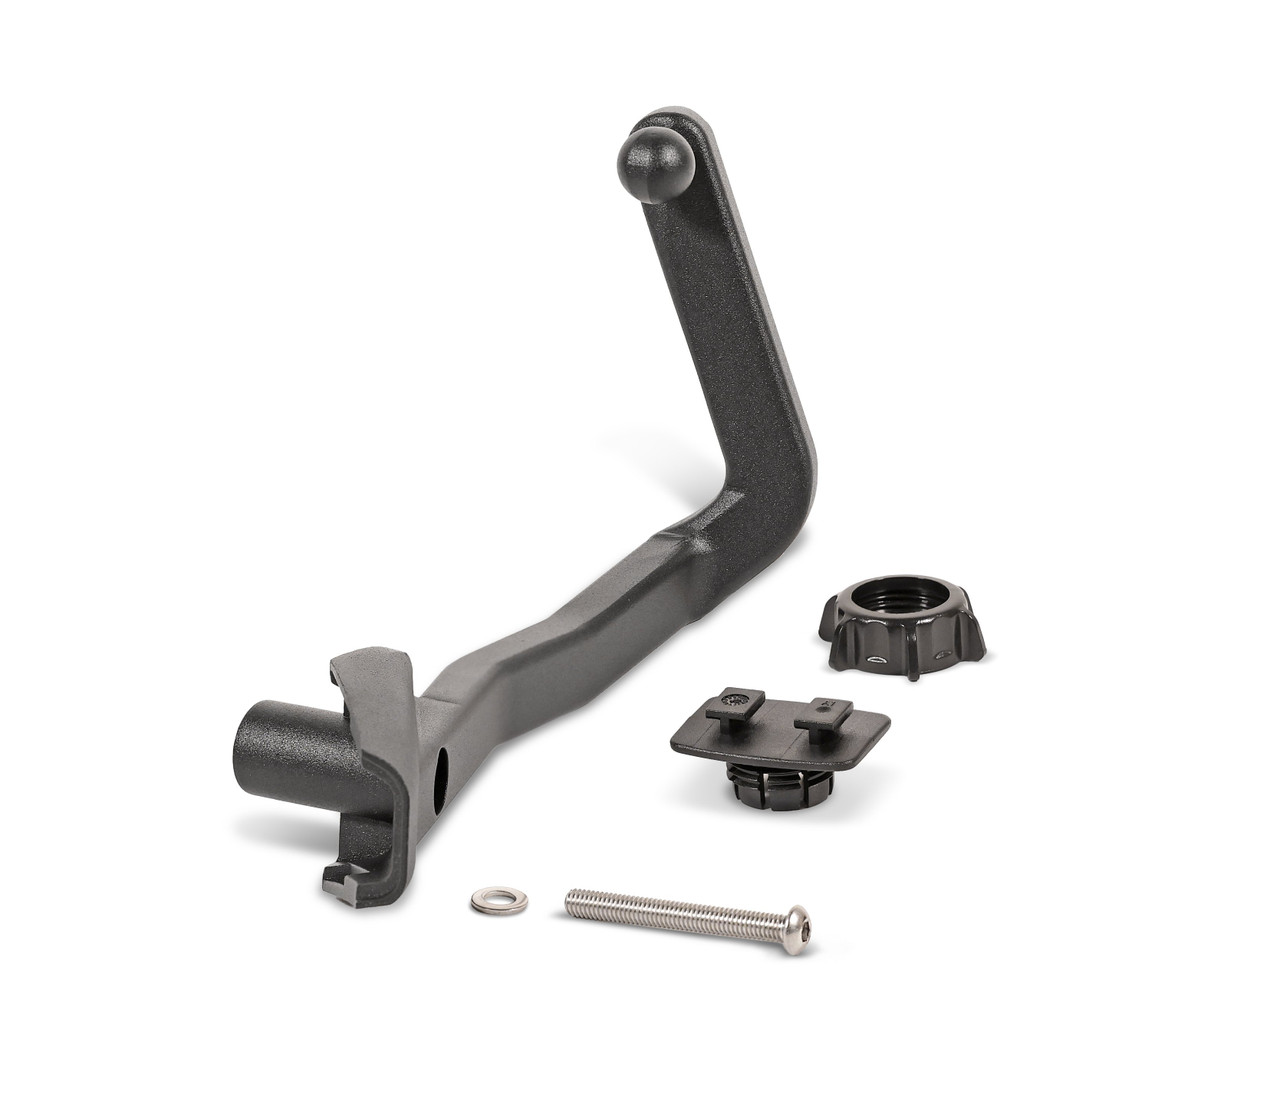  EDGE EZX + INSIGHT CTS3 KIT for 2013 to 2018 RAM 2500/3500 Cummins (33711-3) This View